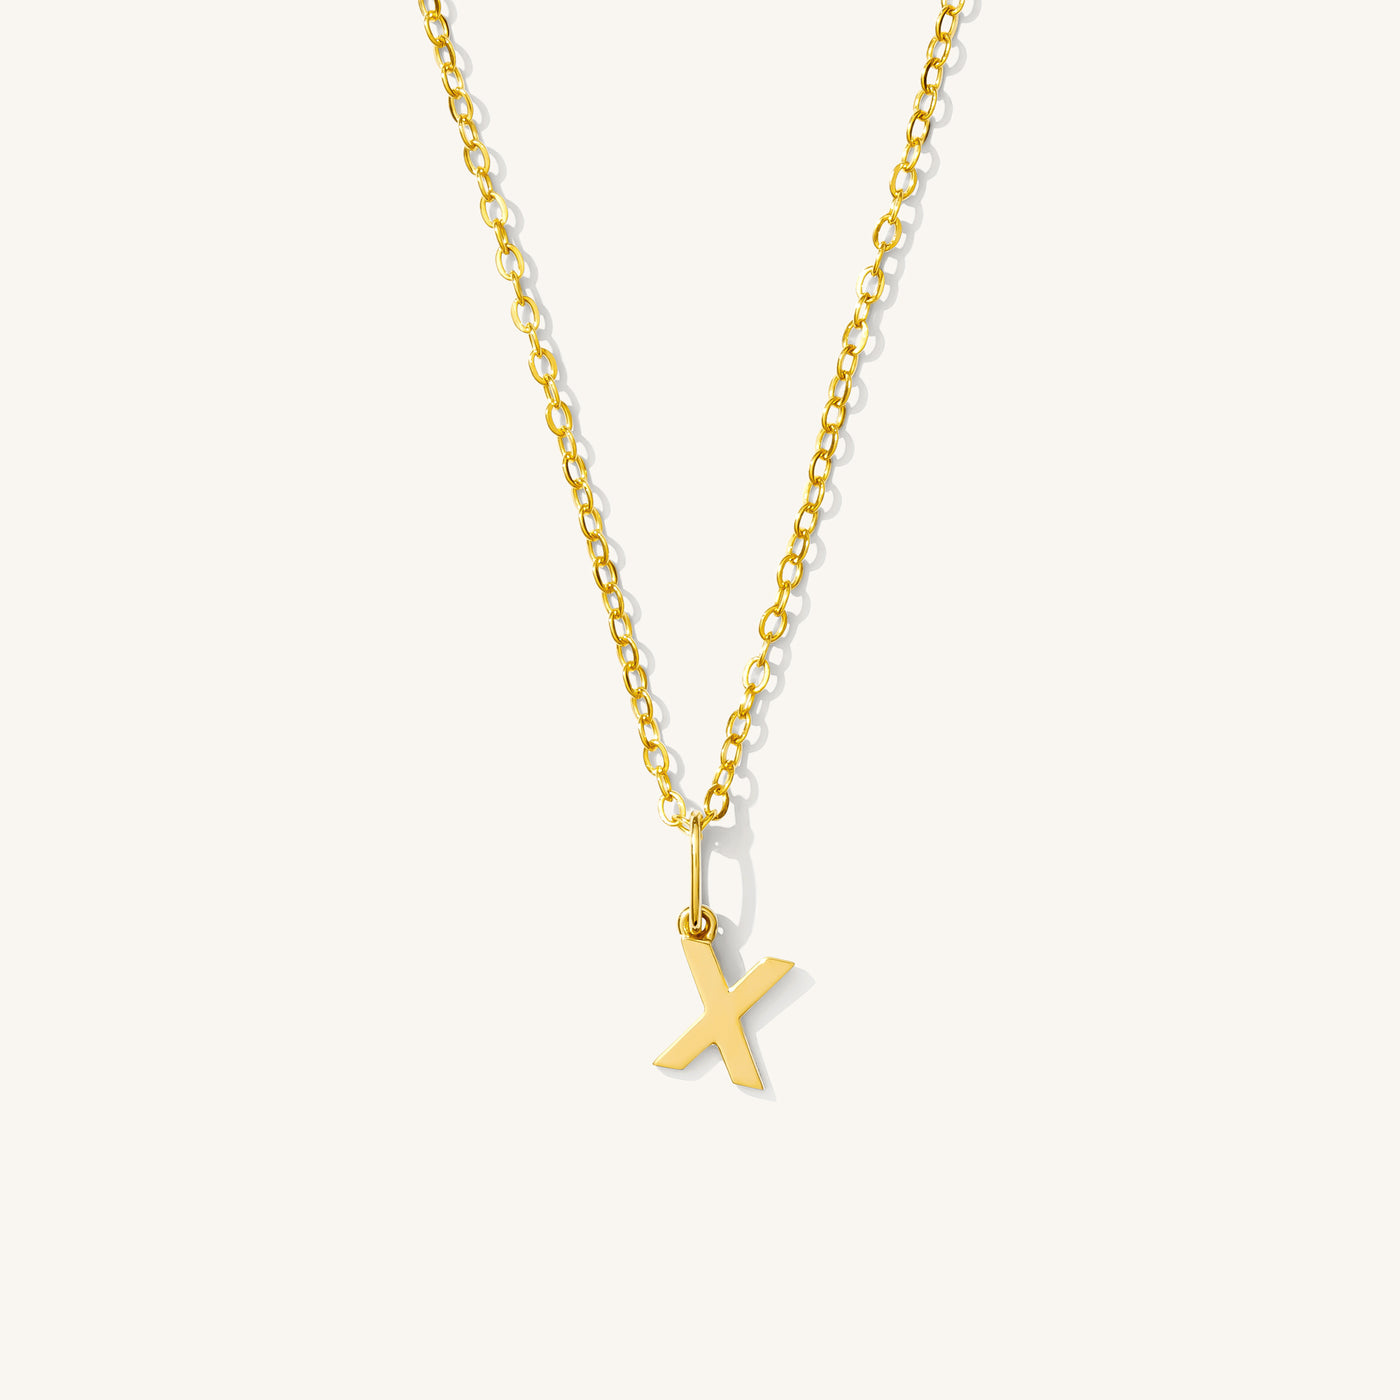 X Tiny Hanging Initial Necklace